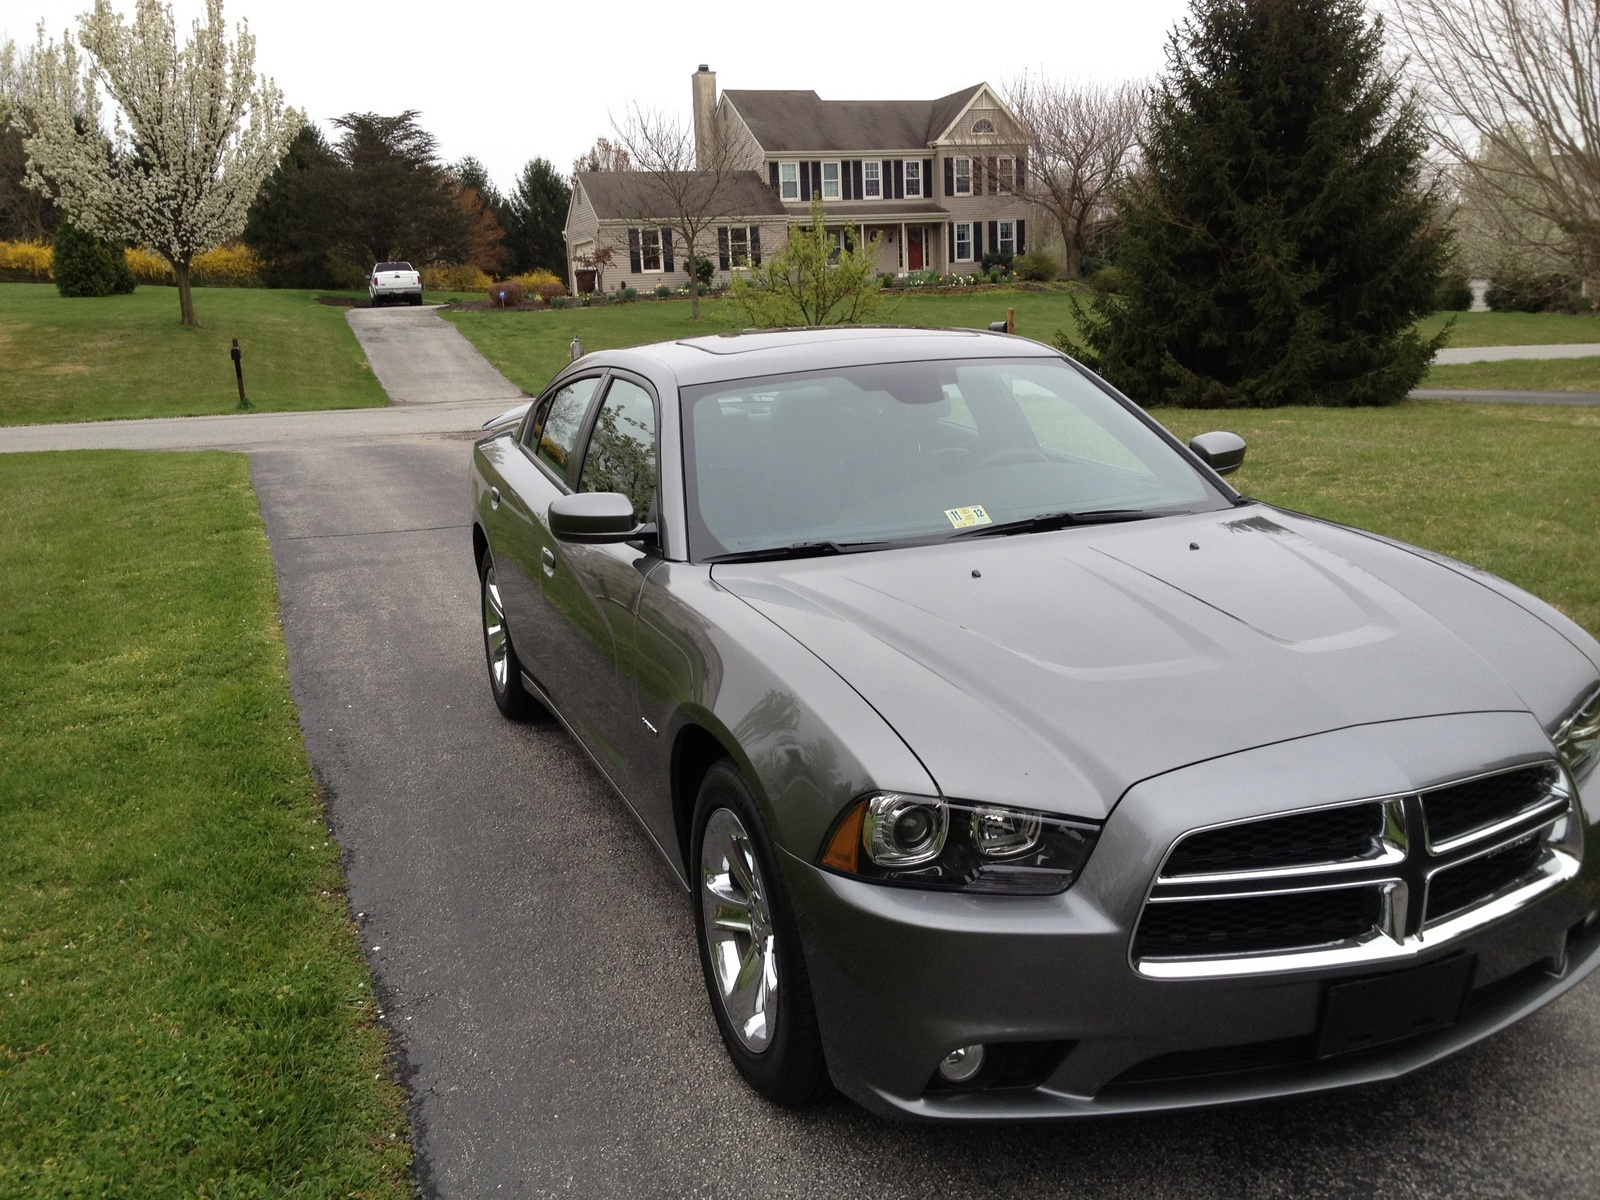 2012 Dodge Charger Prices, Reviews, and Photos - MotorTrend